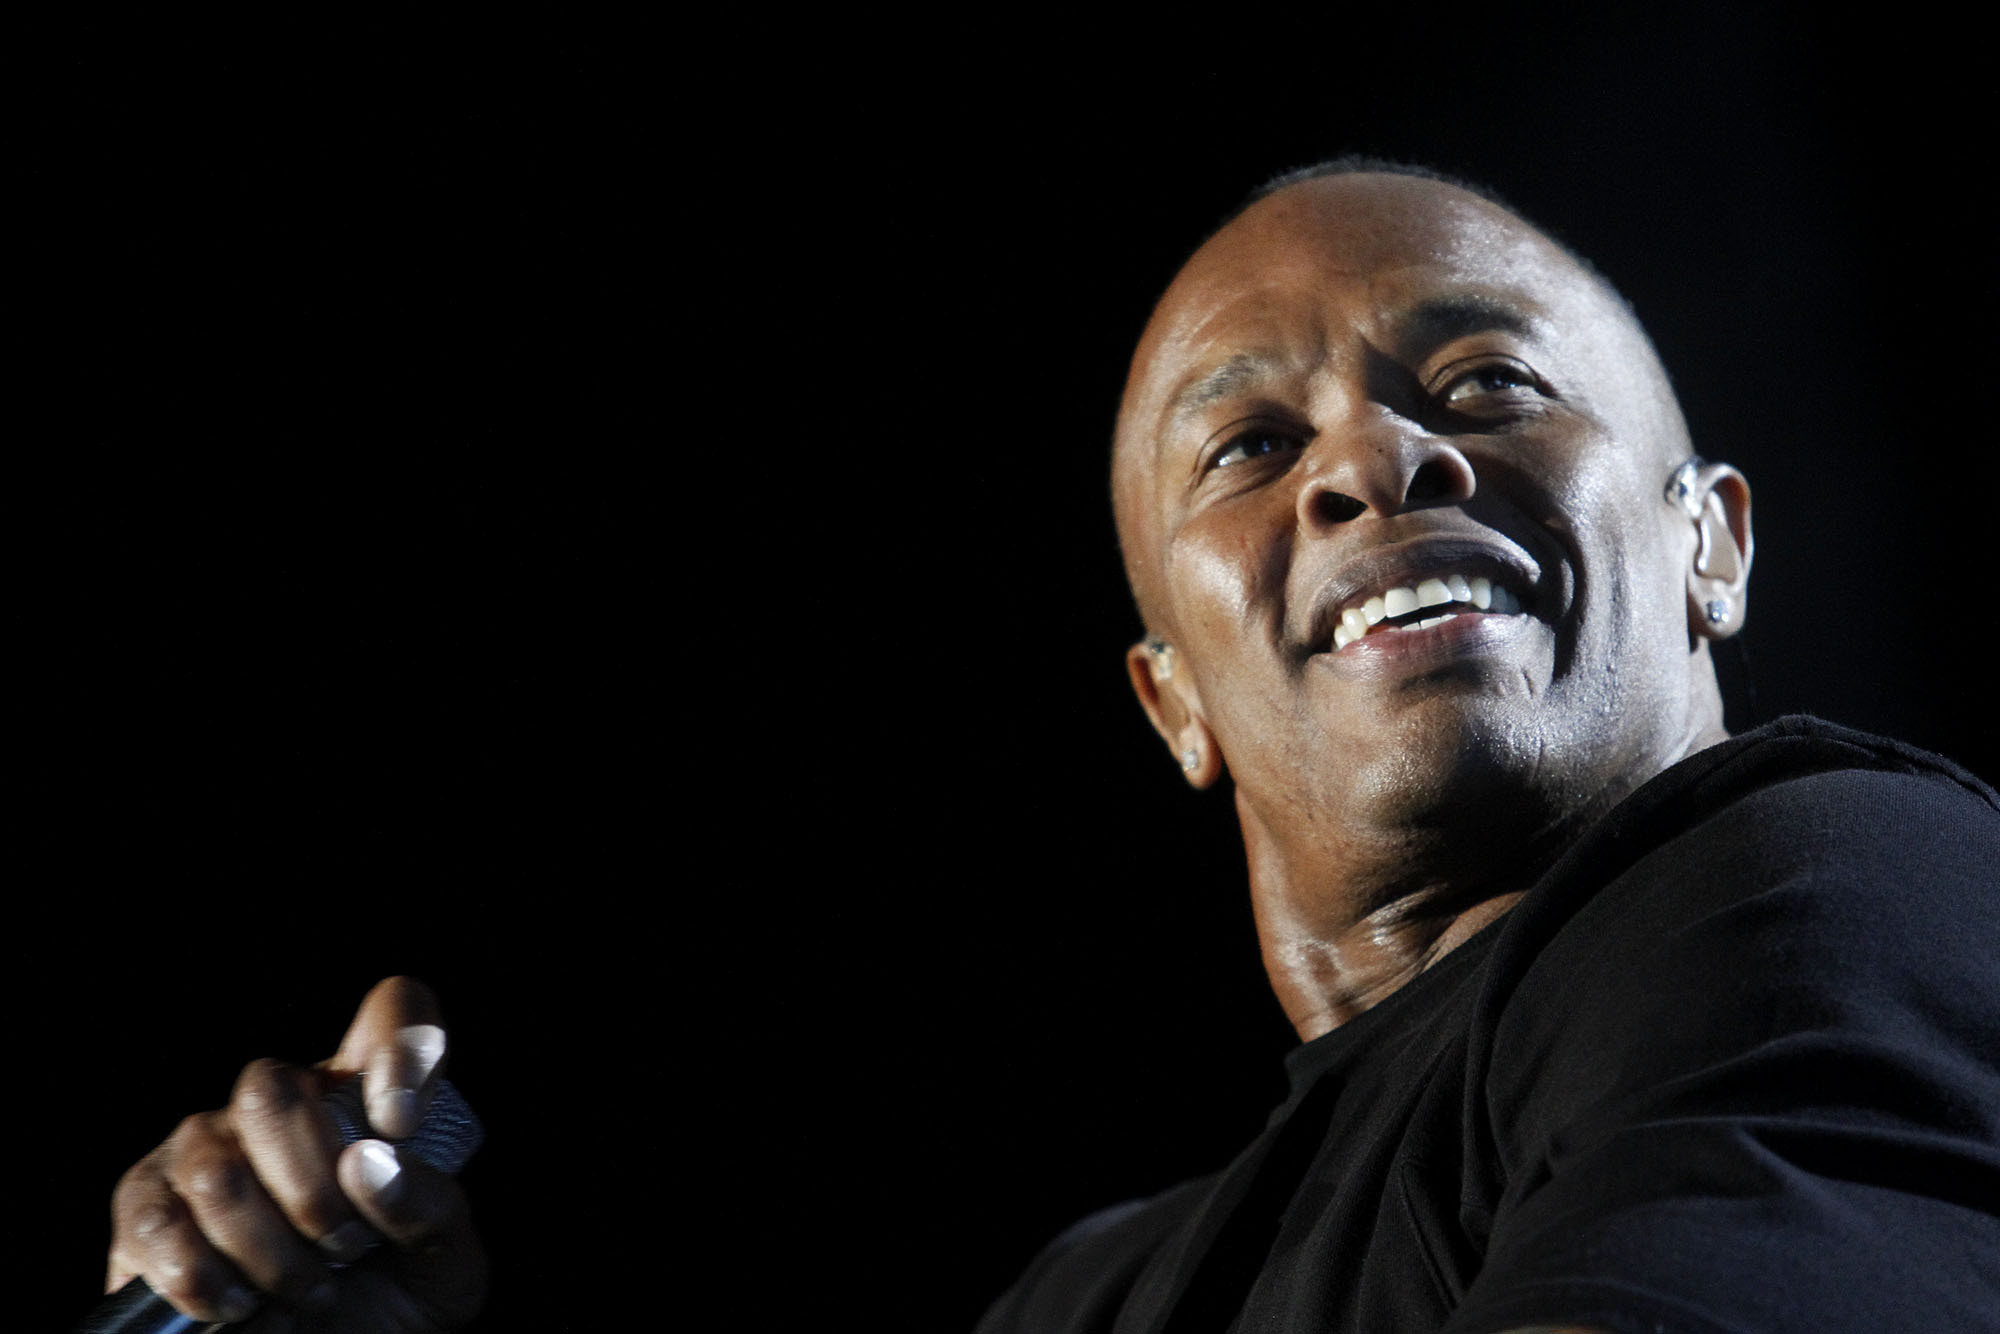 Dr. Dre Wallpapers